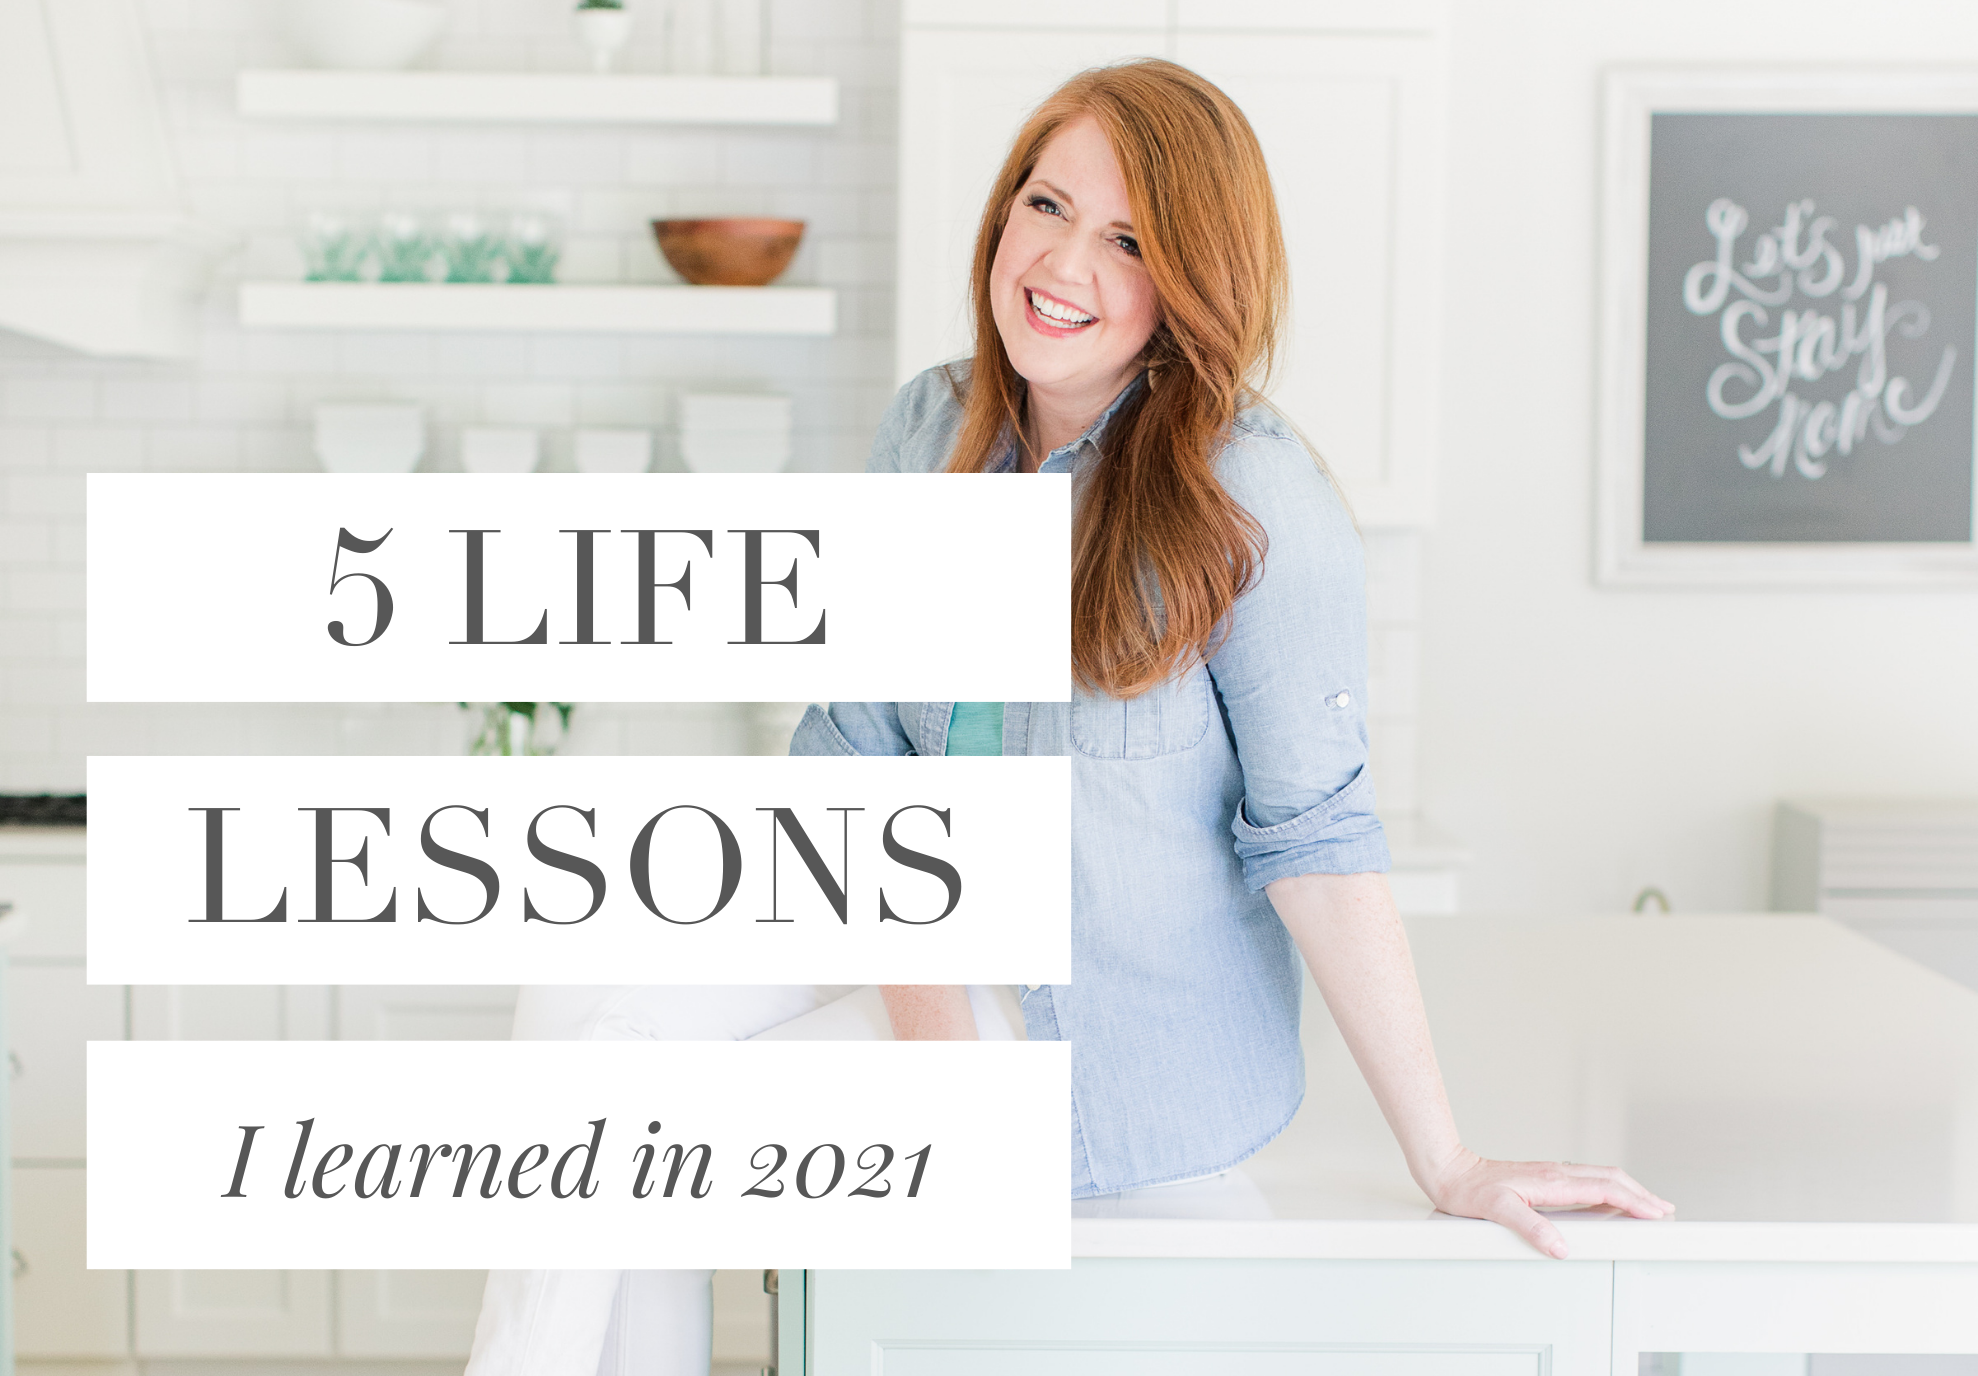 5 Life Lessons I Learned in 2021